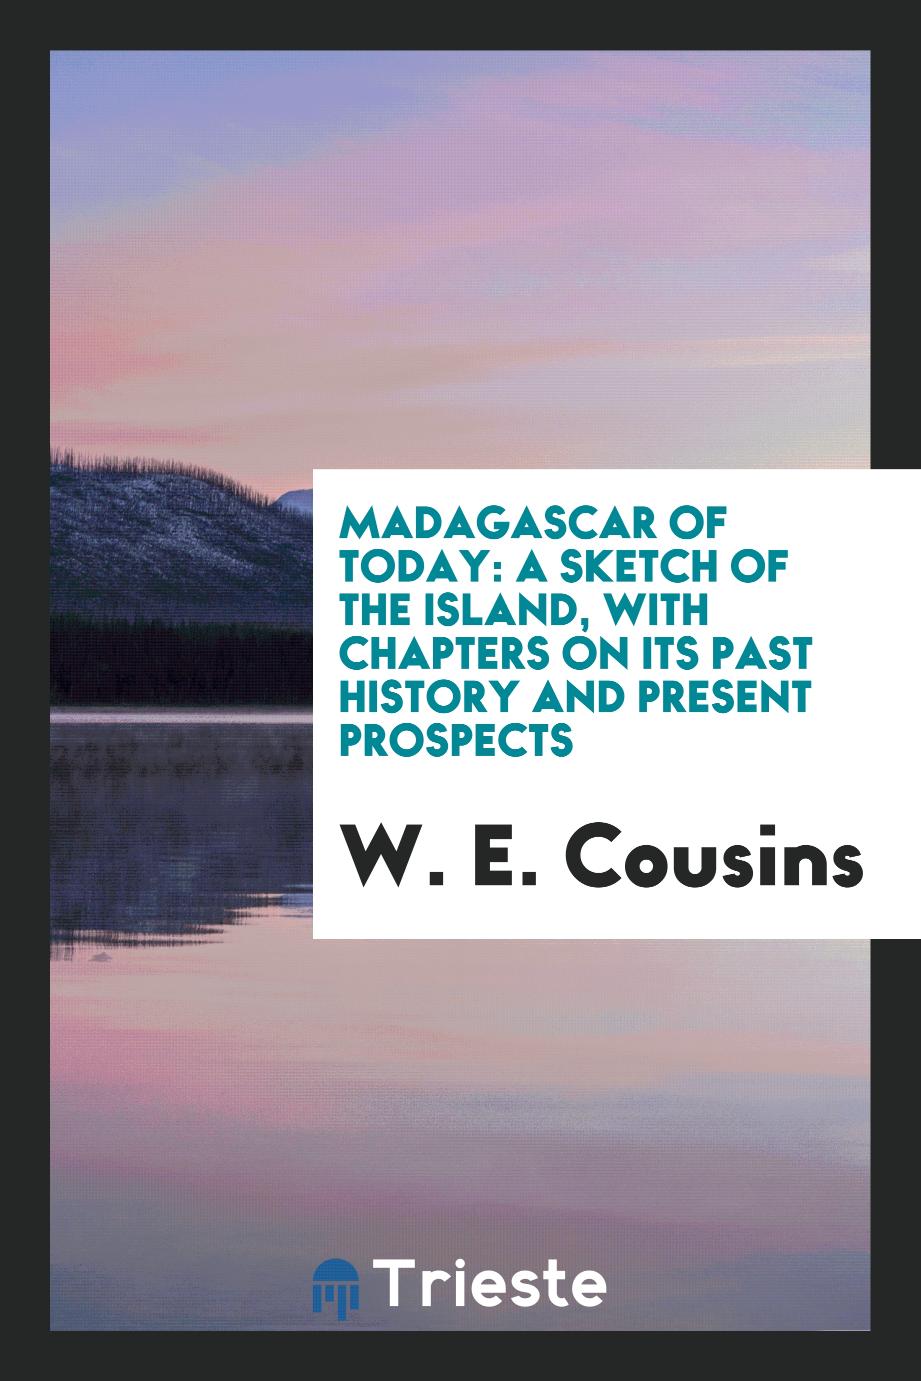 Madagascar of Today: A Sketch of the Island, with Chapters on Its Past History and Present Prospects